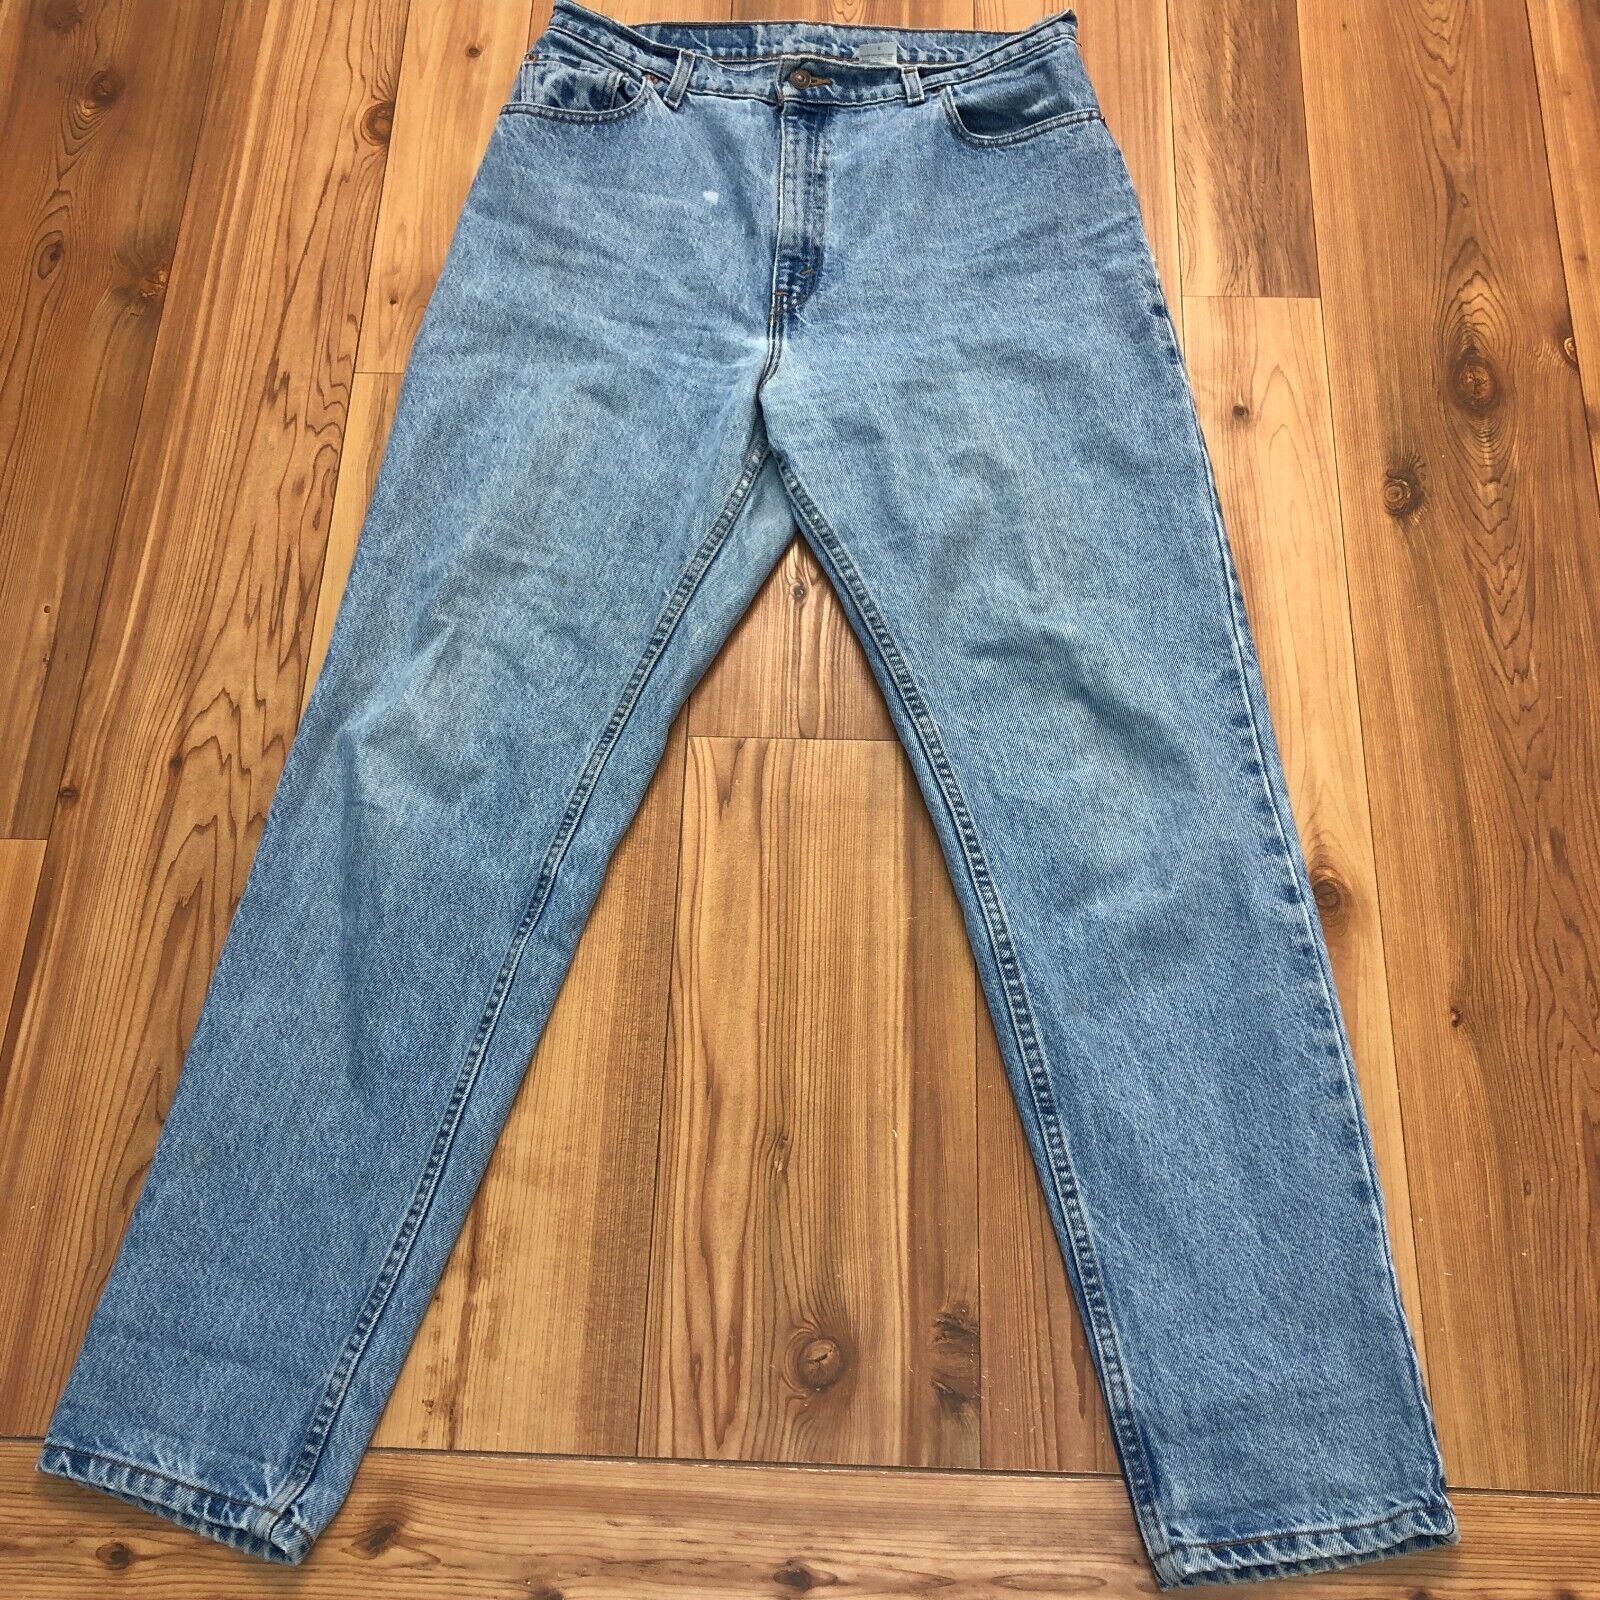 Vintage Levis 551 Blue Light Wash Relaxed Tapered Leg Jeans Women Size 14 Long